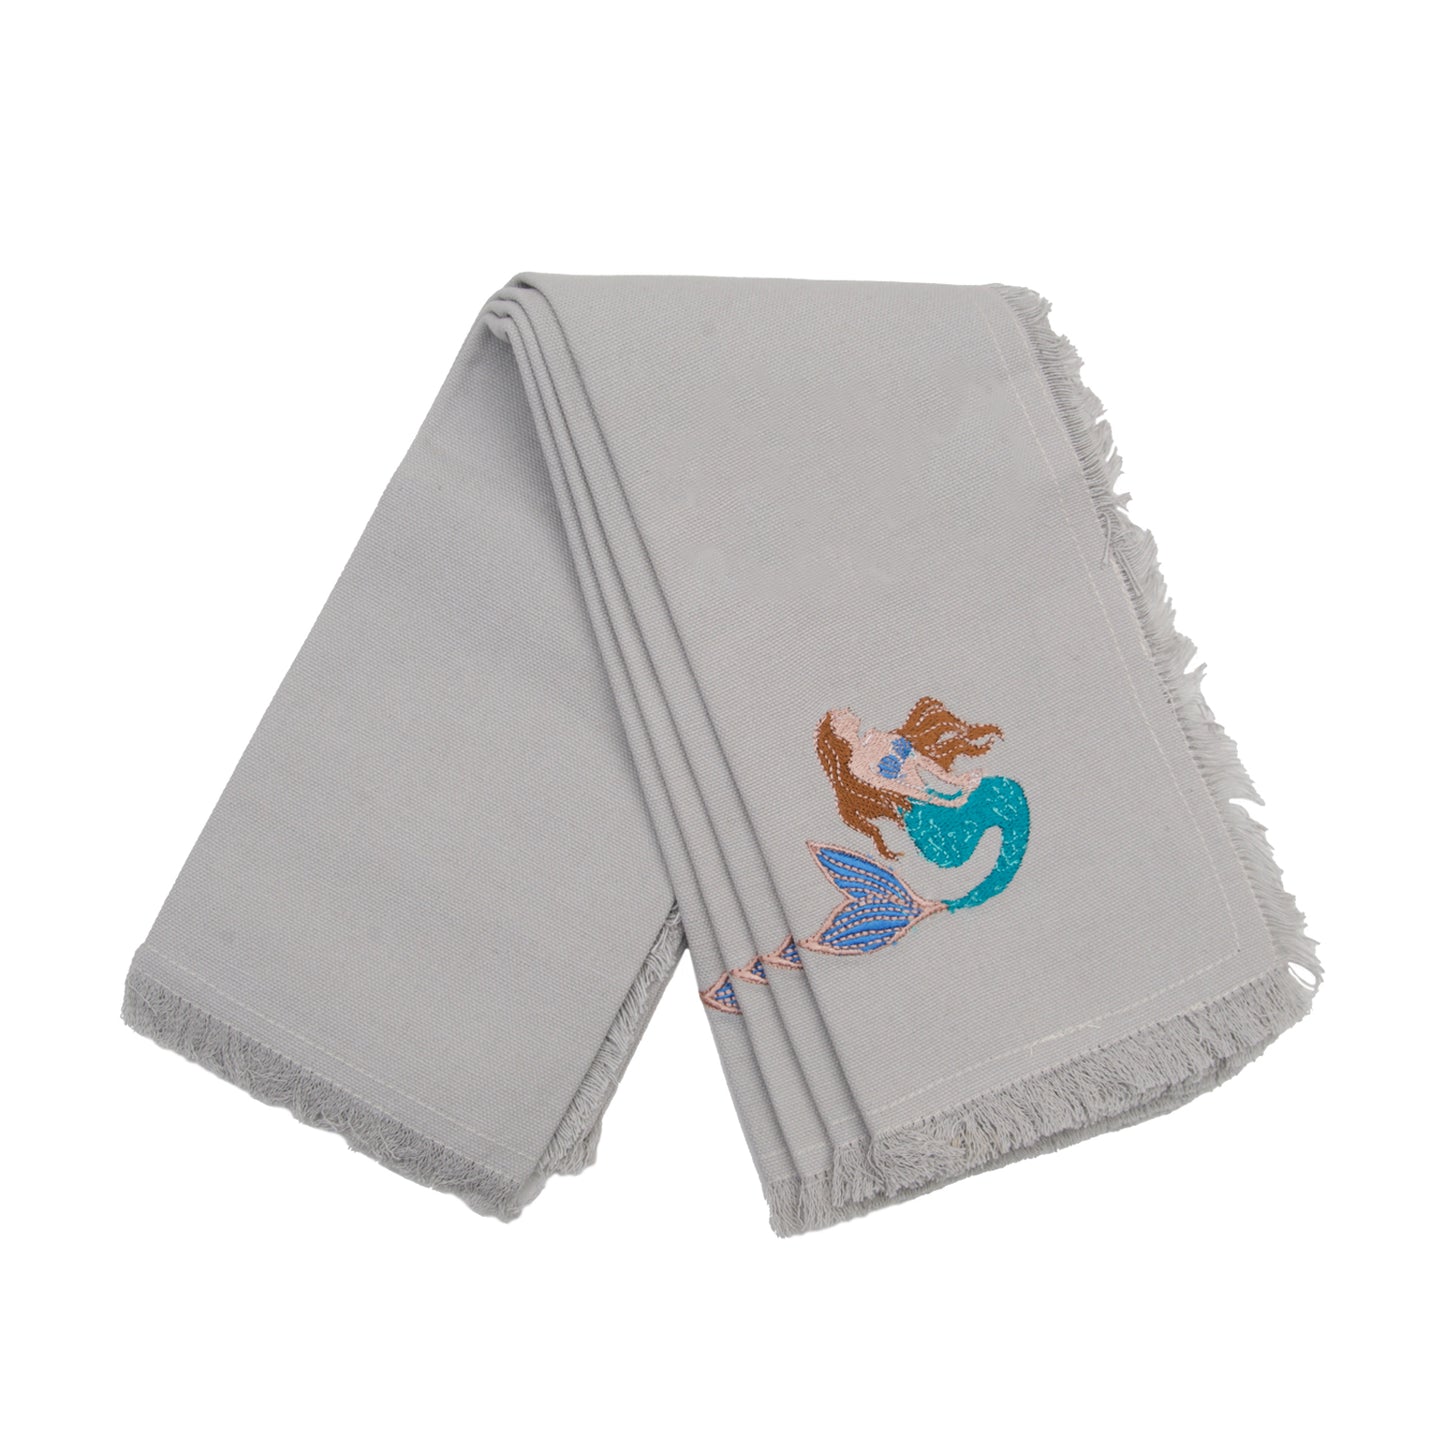 Fringed grey cotton napkins, featuring an embroidered mermaid with brown hair and a turquoise tail.